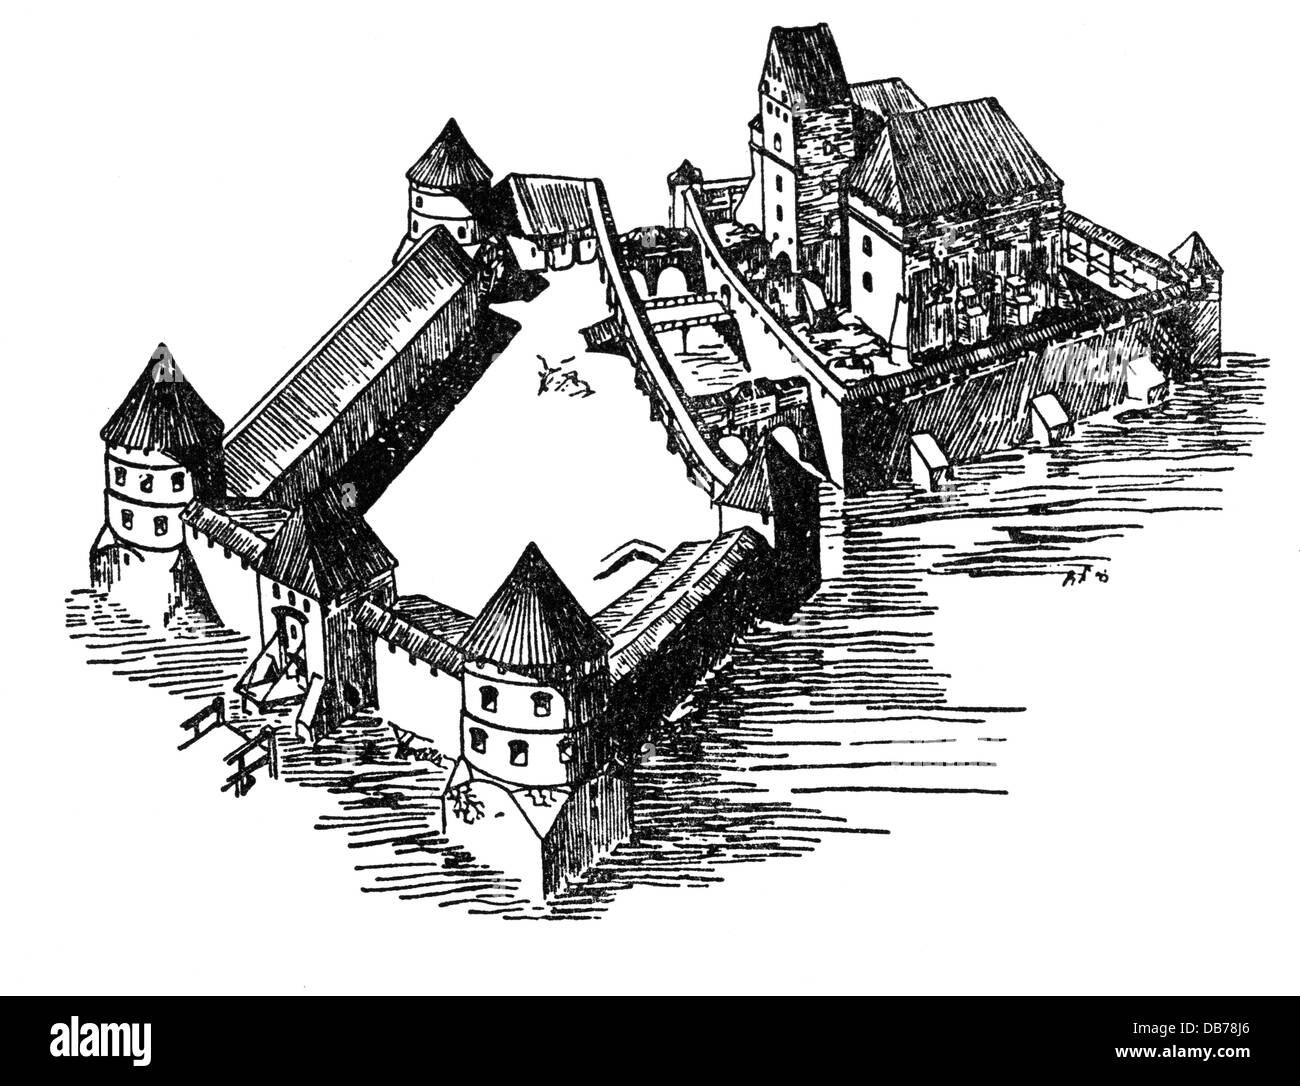 geography / travel, Lithuania, Trakai, castles, island castle, view, 15th century, reconstruction, drawing, 19th century, castle, castles, architecture, Middle Ages, Principality of Lithuania, Baltics, Baltic area, Baltic states, Baltic countries, Central Europe, Europe, historic, historical, medieval, Additional-Rights-Clearences-Not Available Stock Photo